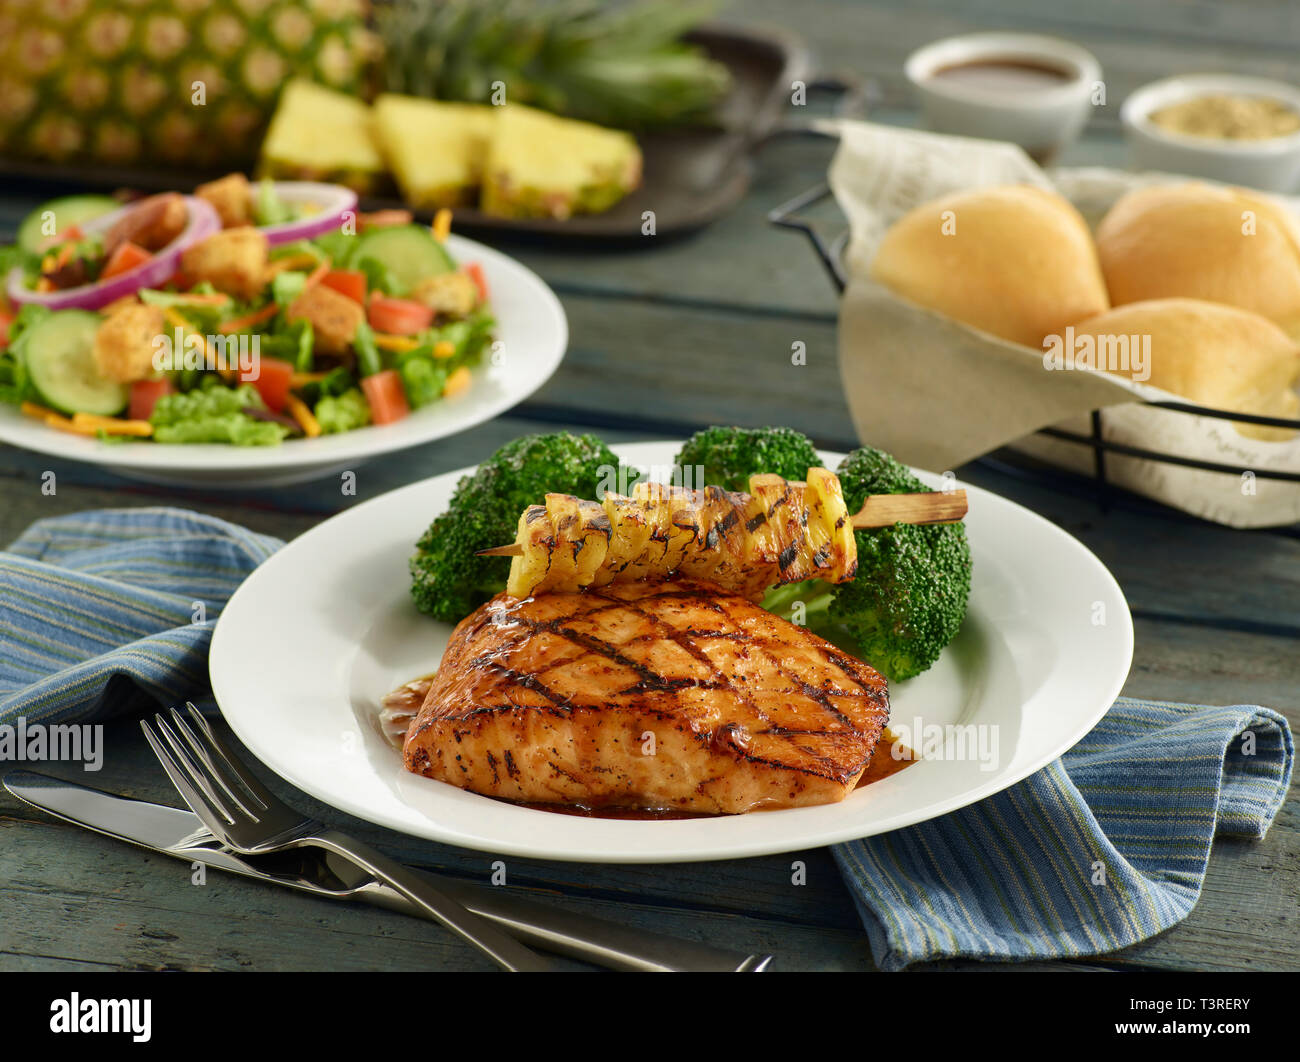 Glazed salmon filet with grilled pineapple, broccoli, salad and dinner rolls Stock Photo